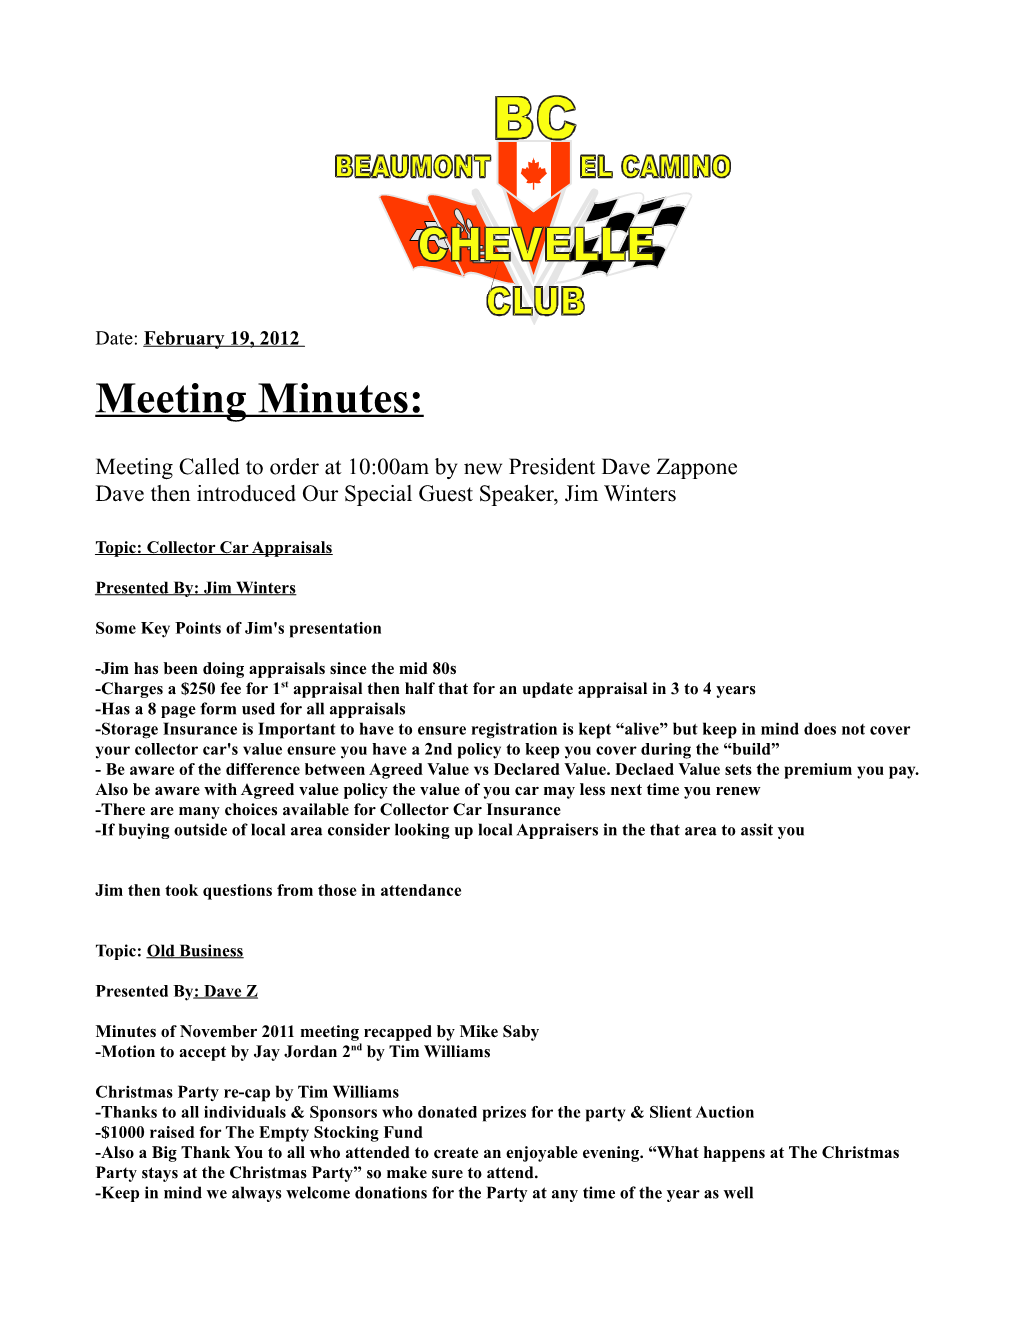 Meeting Called to Order at 10:00Am by New President Dave Zappone